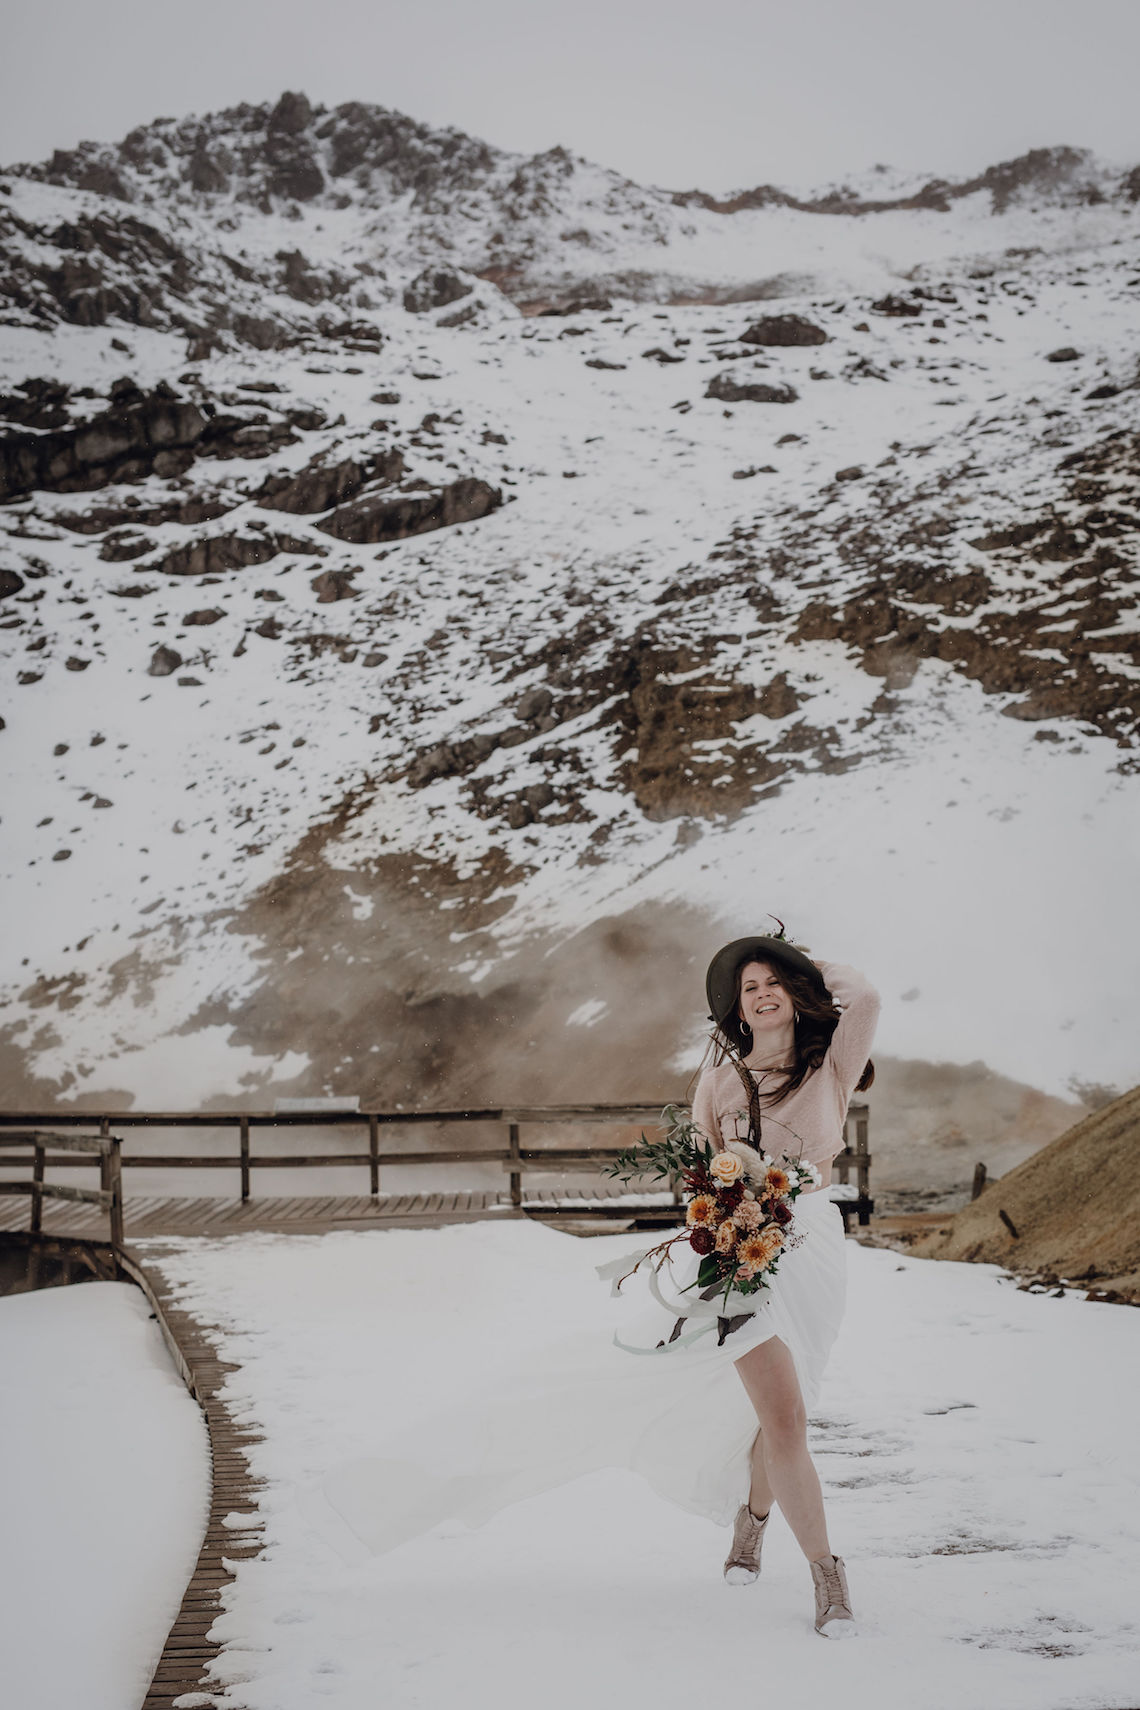 Wild Winter Wedding Inspiration from Iceland – Snowy Scenery and a Bridal Sweater – Melanie Munoz Photography 36